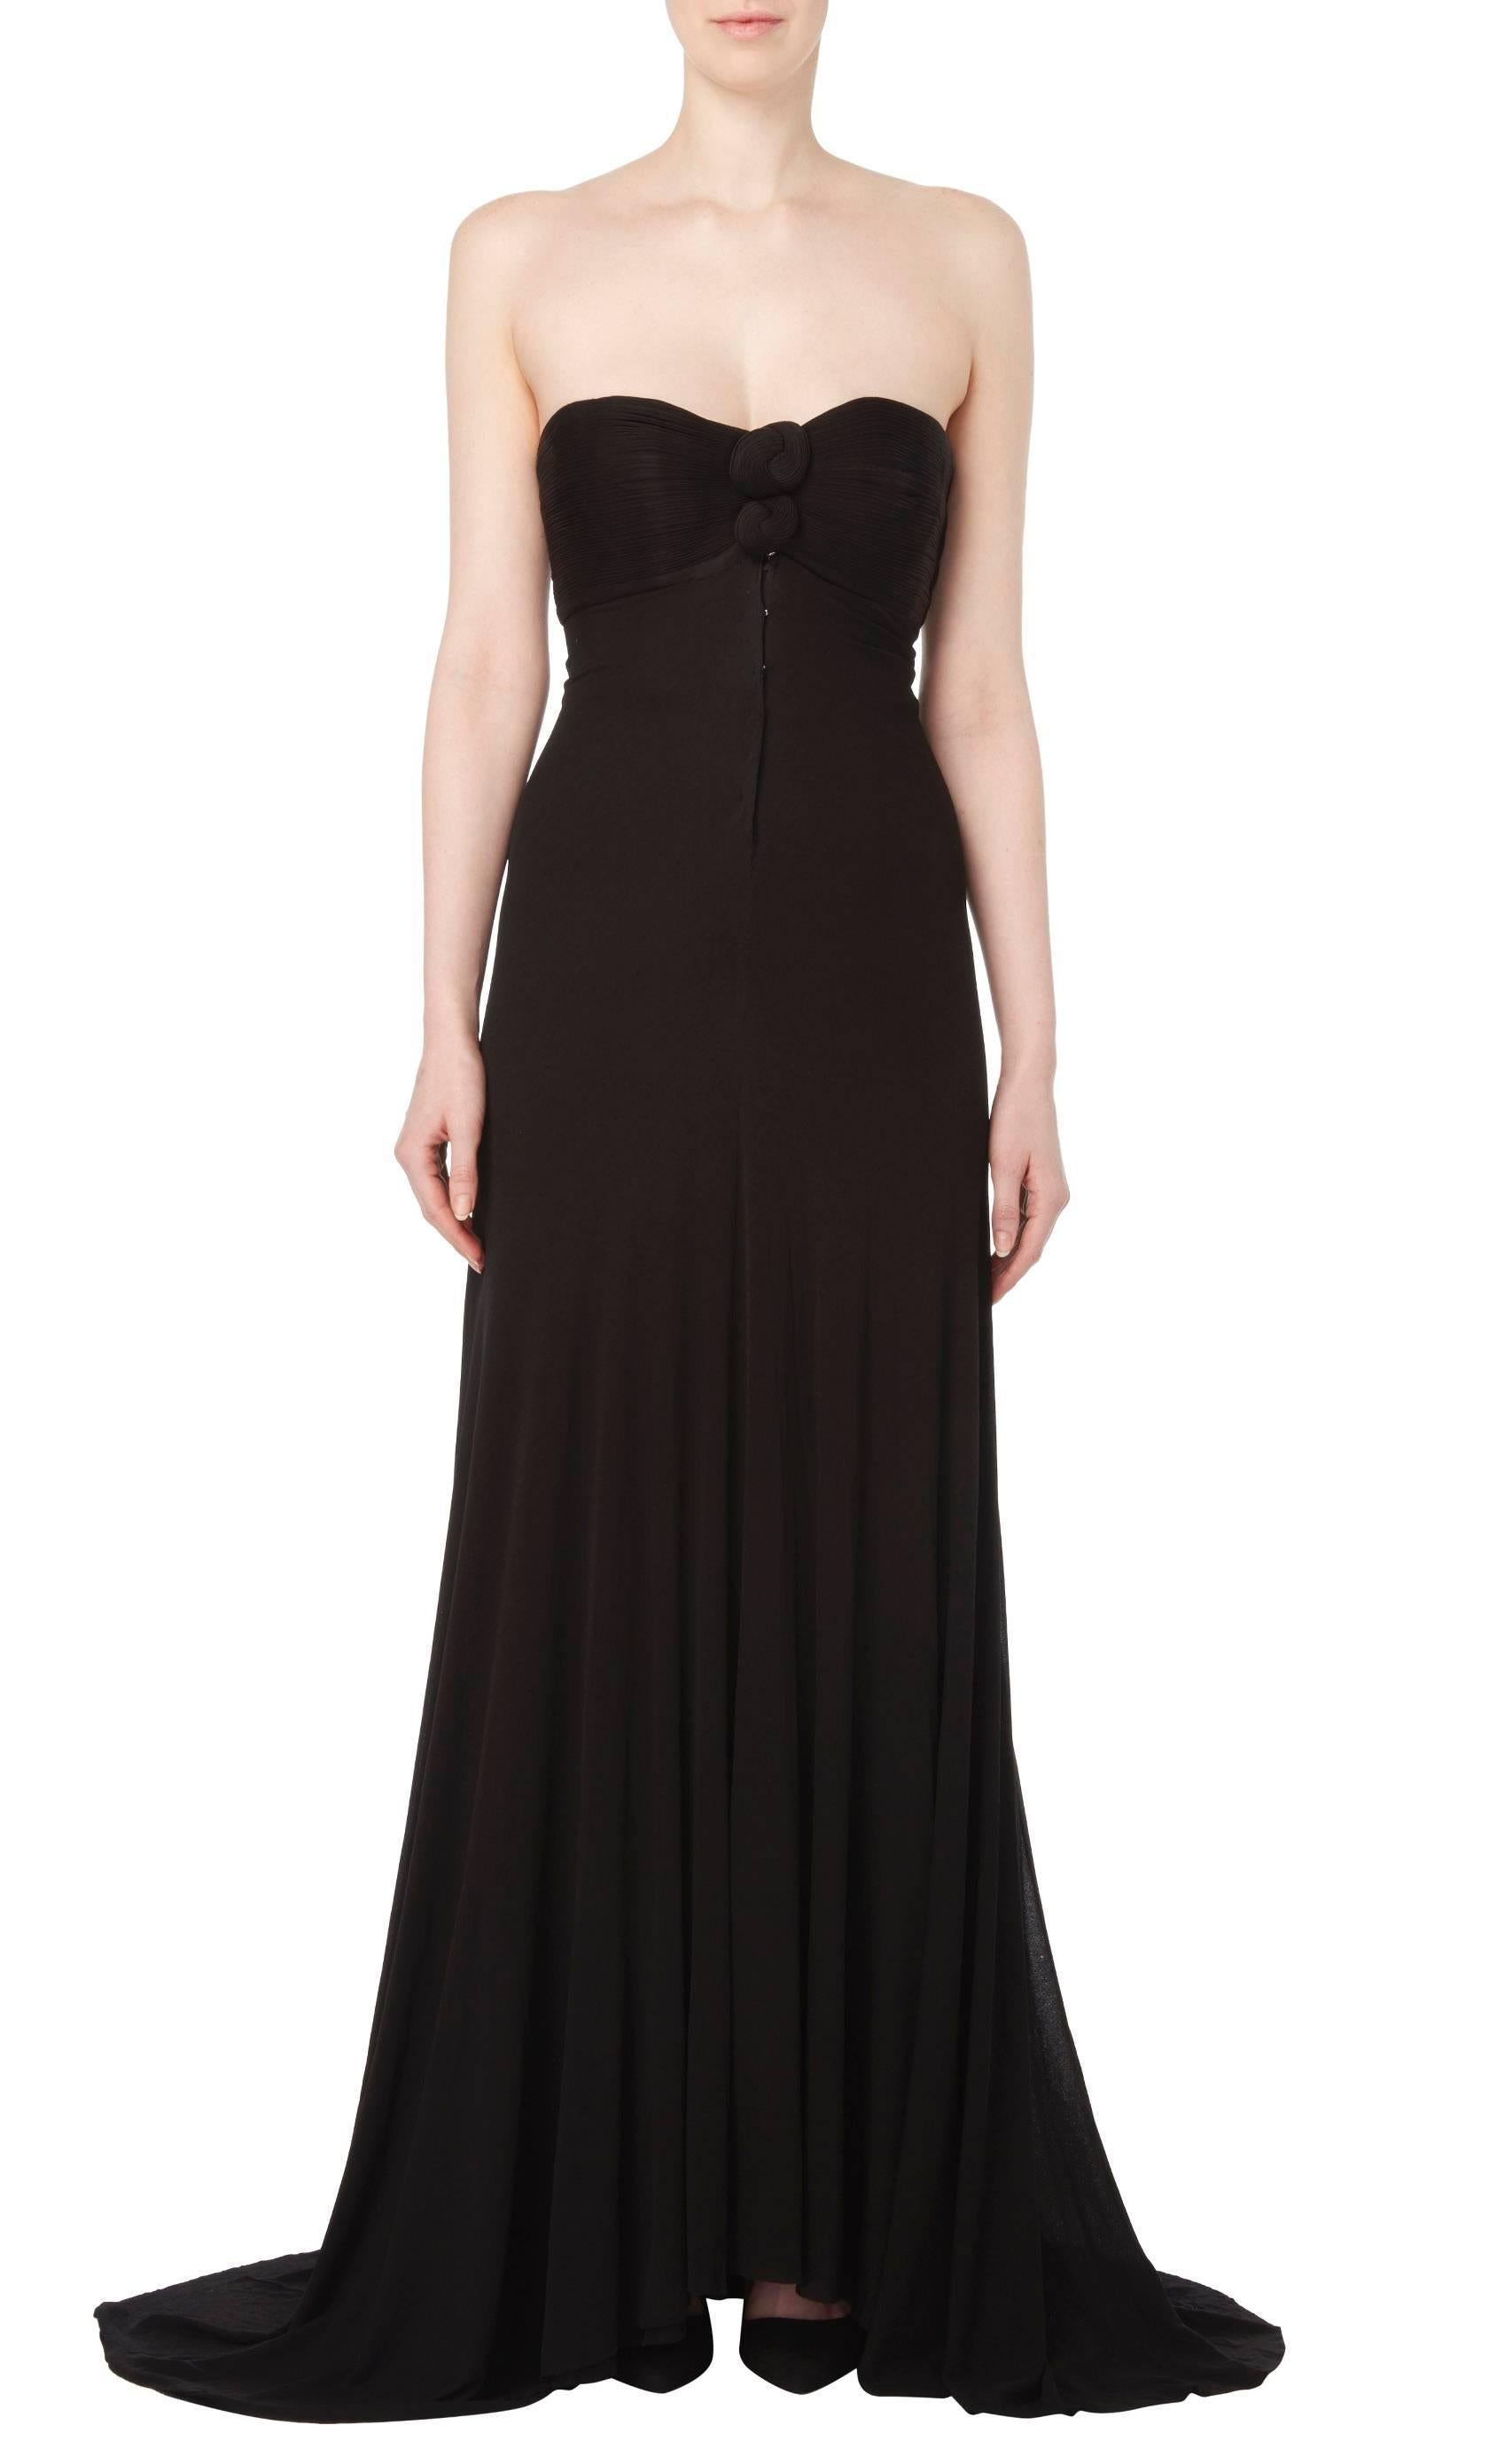 This iconic, strapless dress is a dramatic piece of sinuous haute couture from Madame Grès. Featuring a boned, lined bodice and detailing ruched knots at the bust, the dress is stealthily chic as it flows from the original fasteners and poppers and